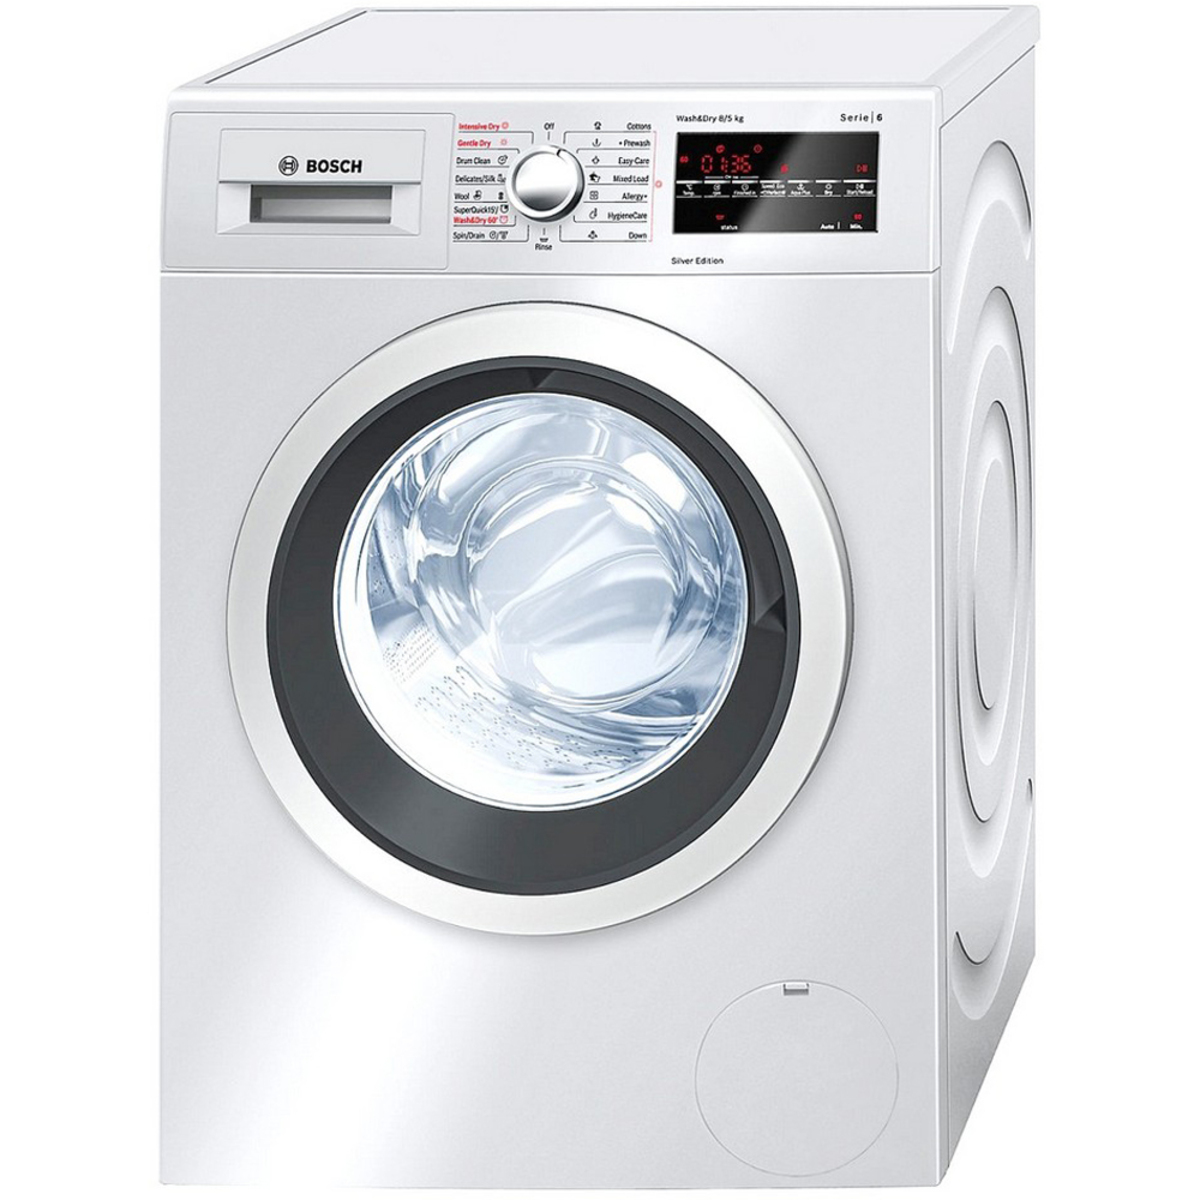 Bosch Fully Automatic Washer & Dryer WVG30460 8Kg